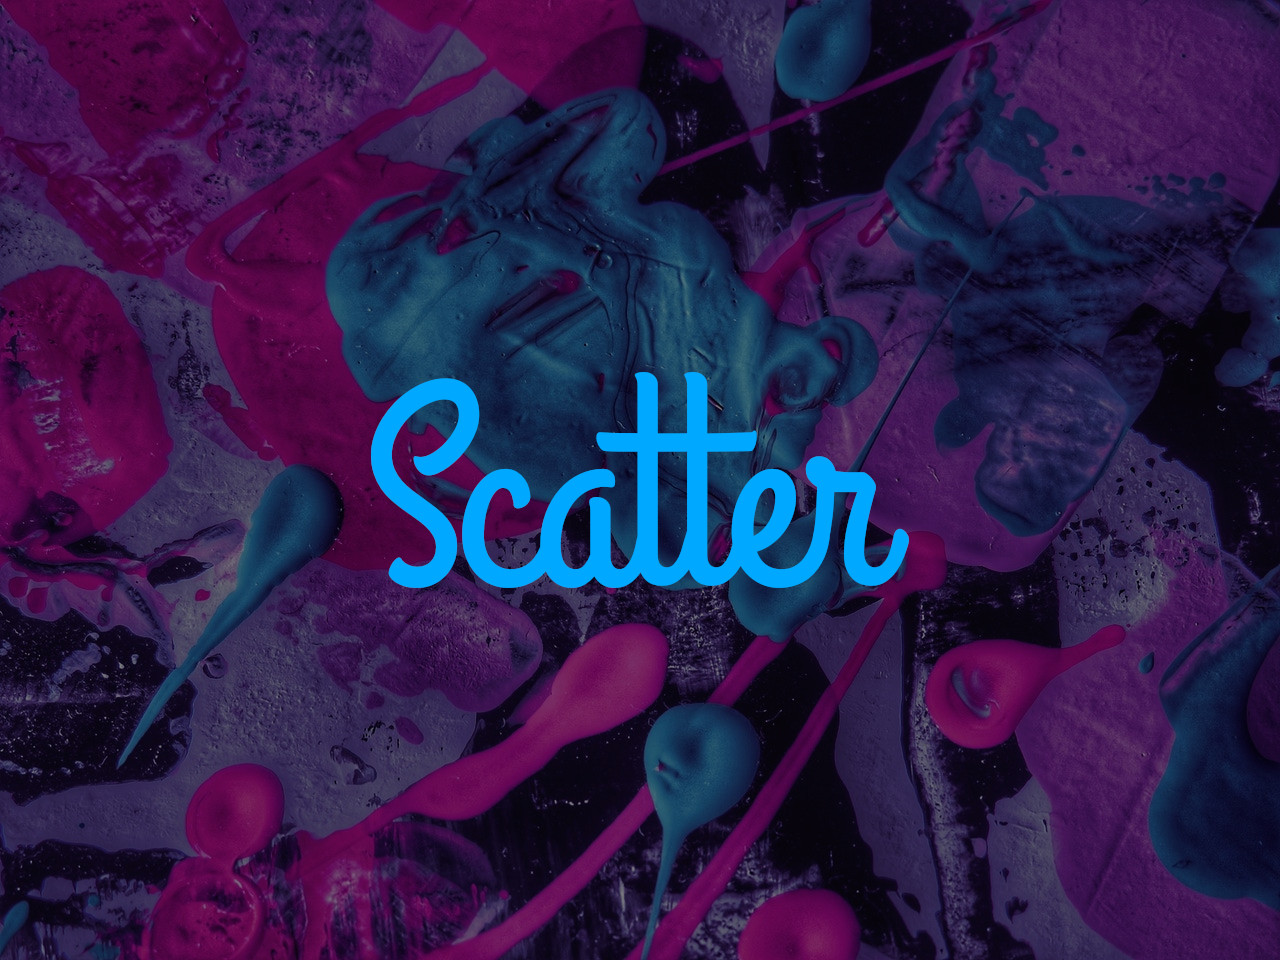 scatter featured